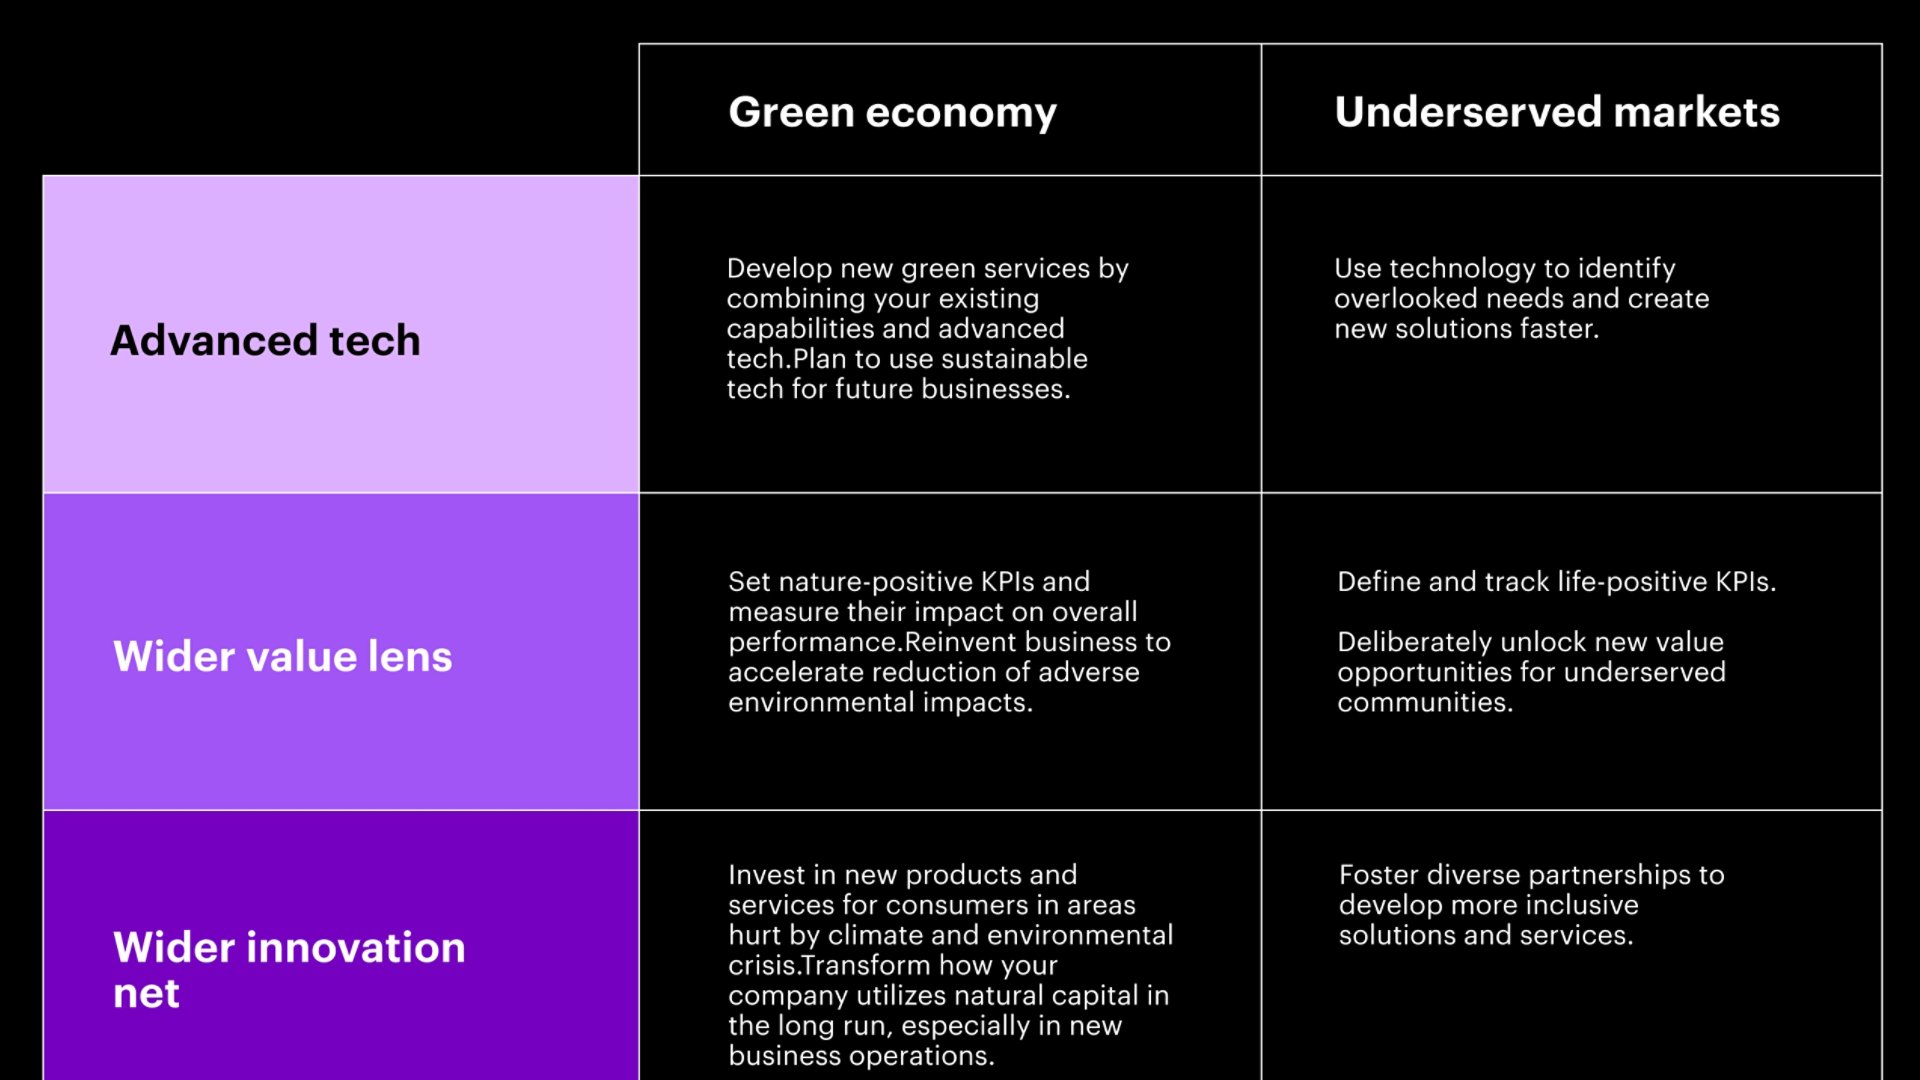 Comparison of advanced tech, wider value lens and wider innovation net in green economy and underserved markets.